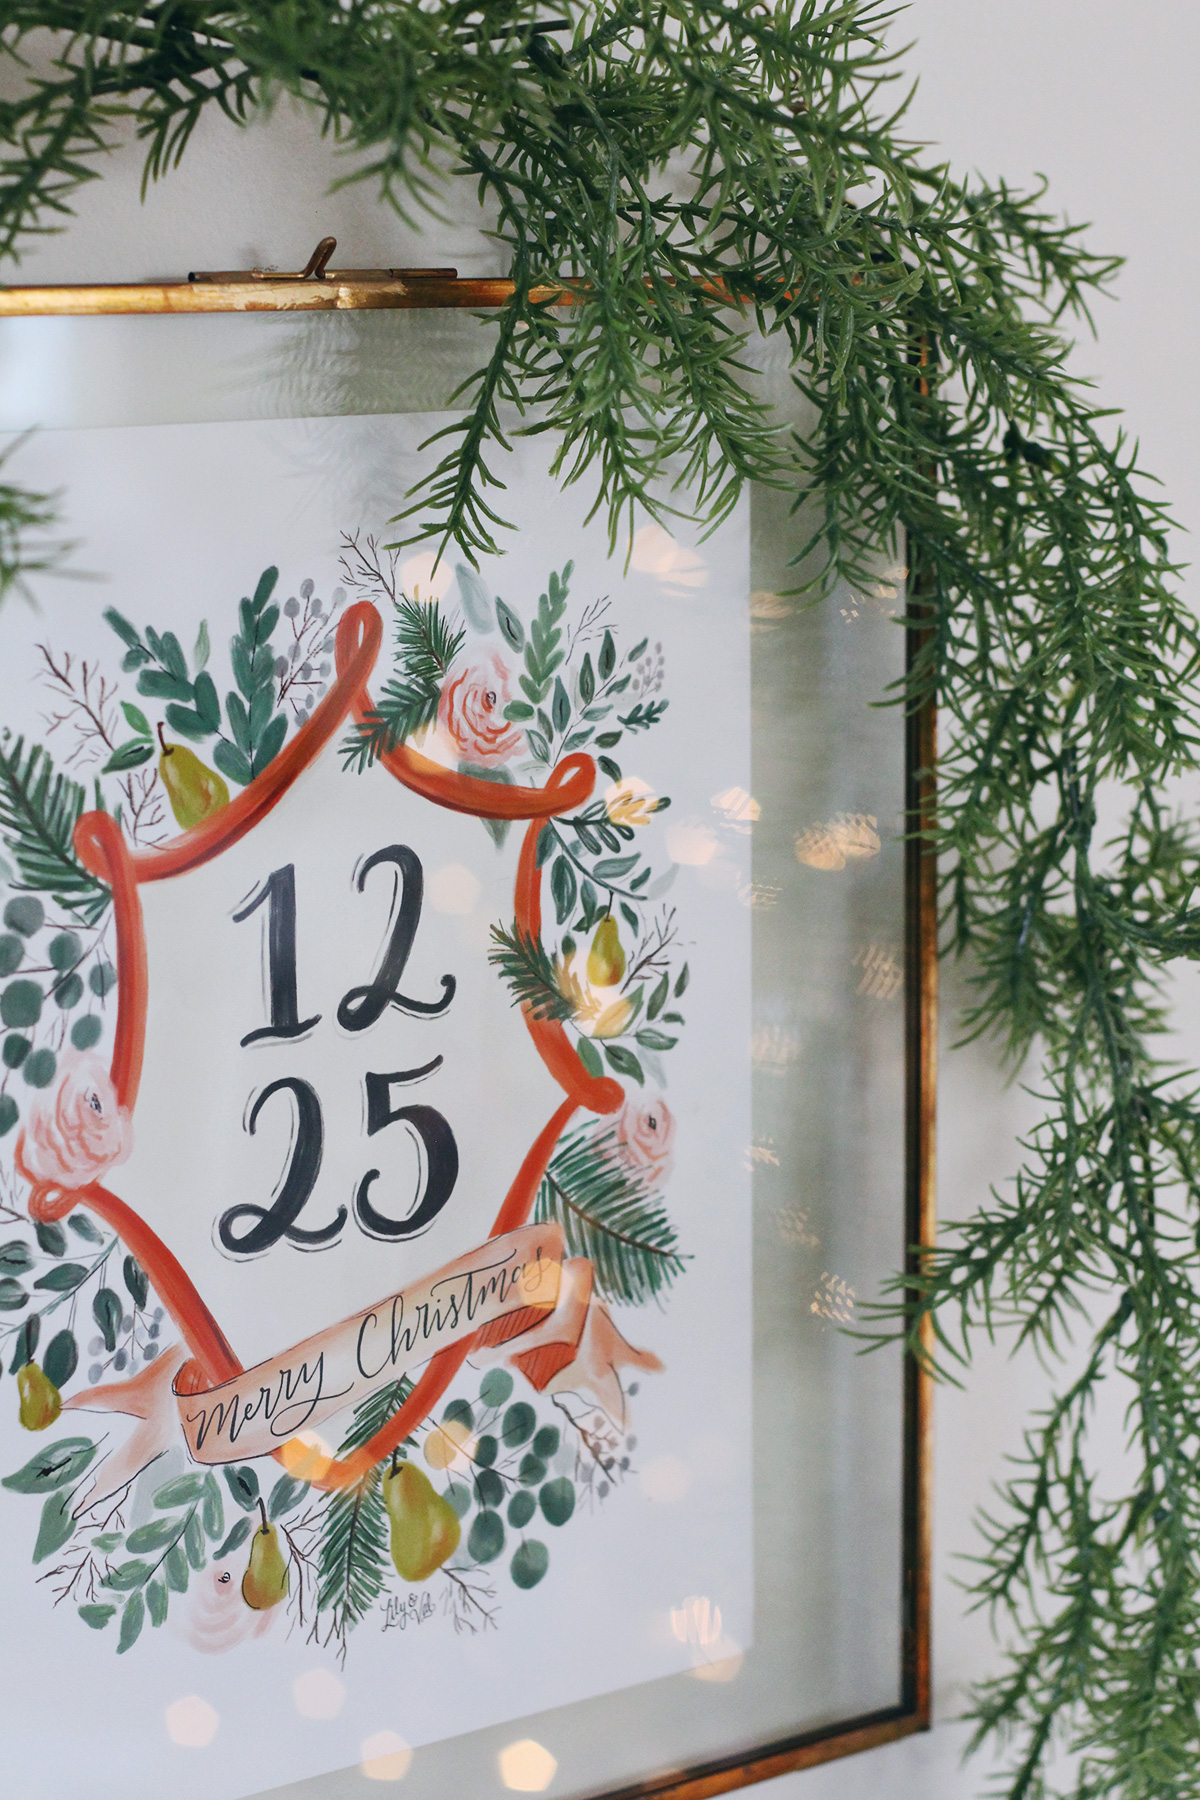 How to use a Hearth & Hand™ brass frame from Target to make this Holiday Wall Hanging